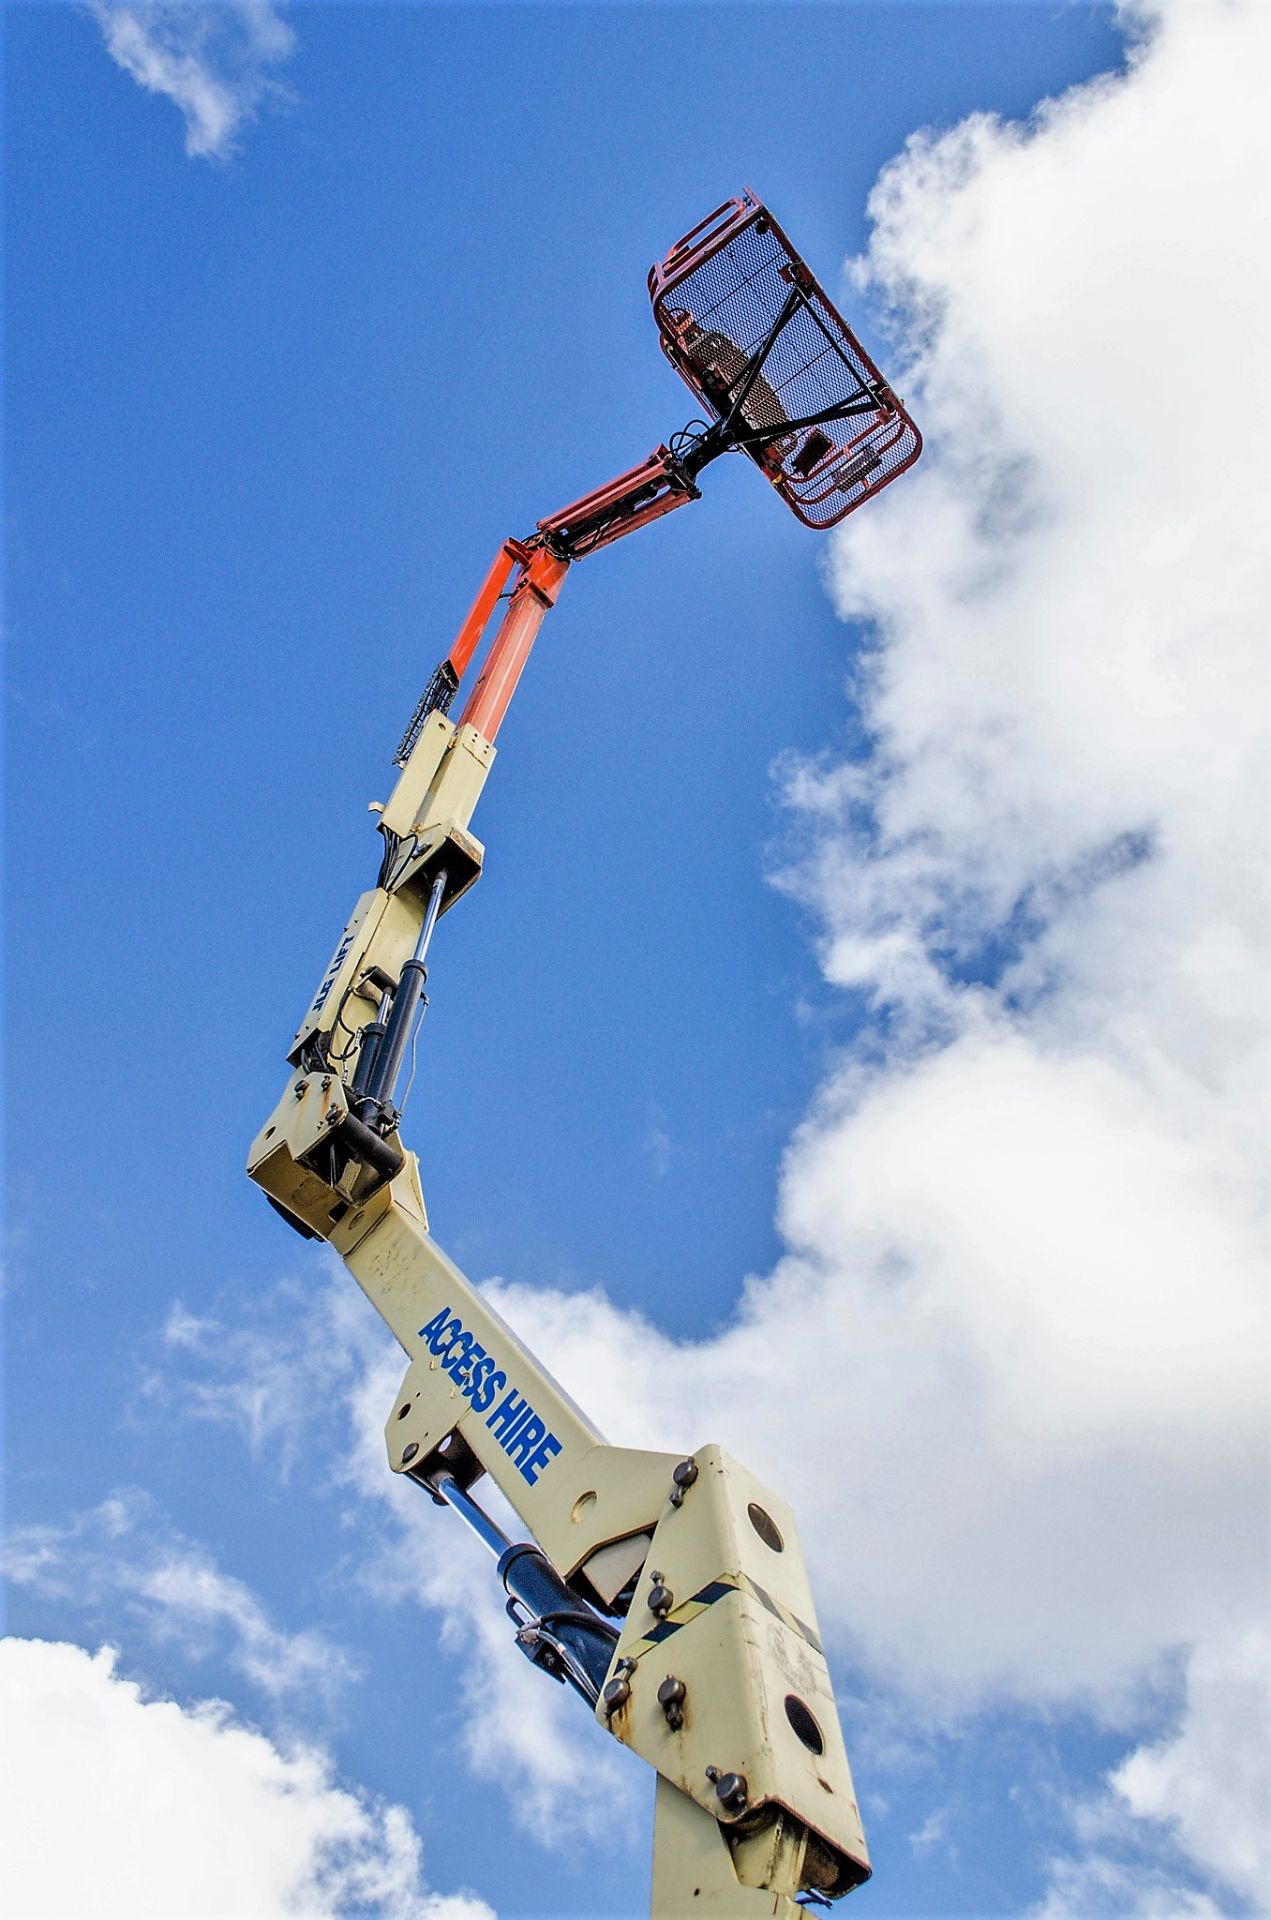 JLG M450AJ battery electric articulated boom access platform Year : 2006 S/N: 2718 c/w generator - Image 12 of 19